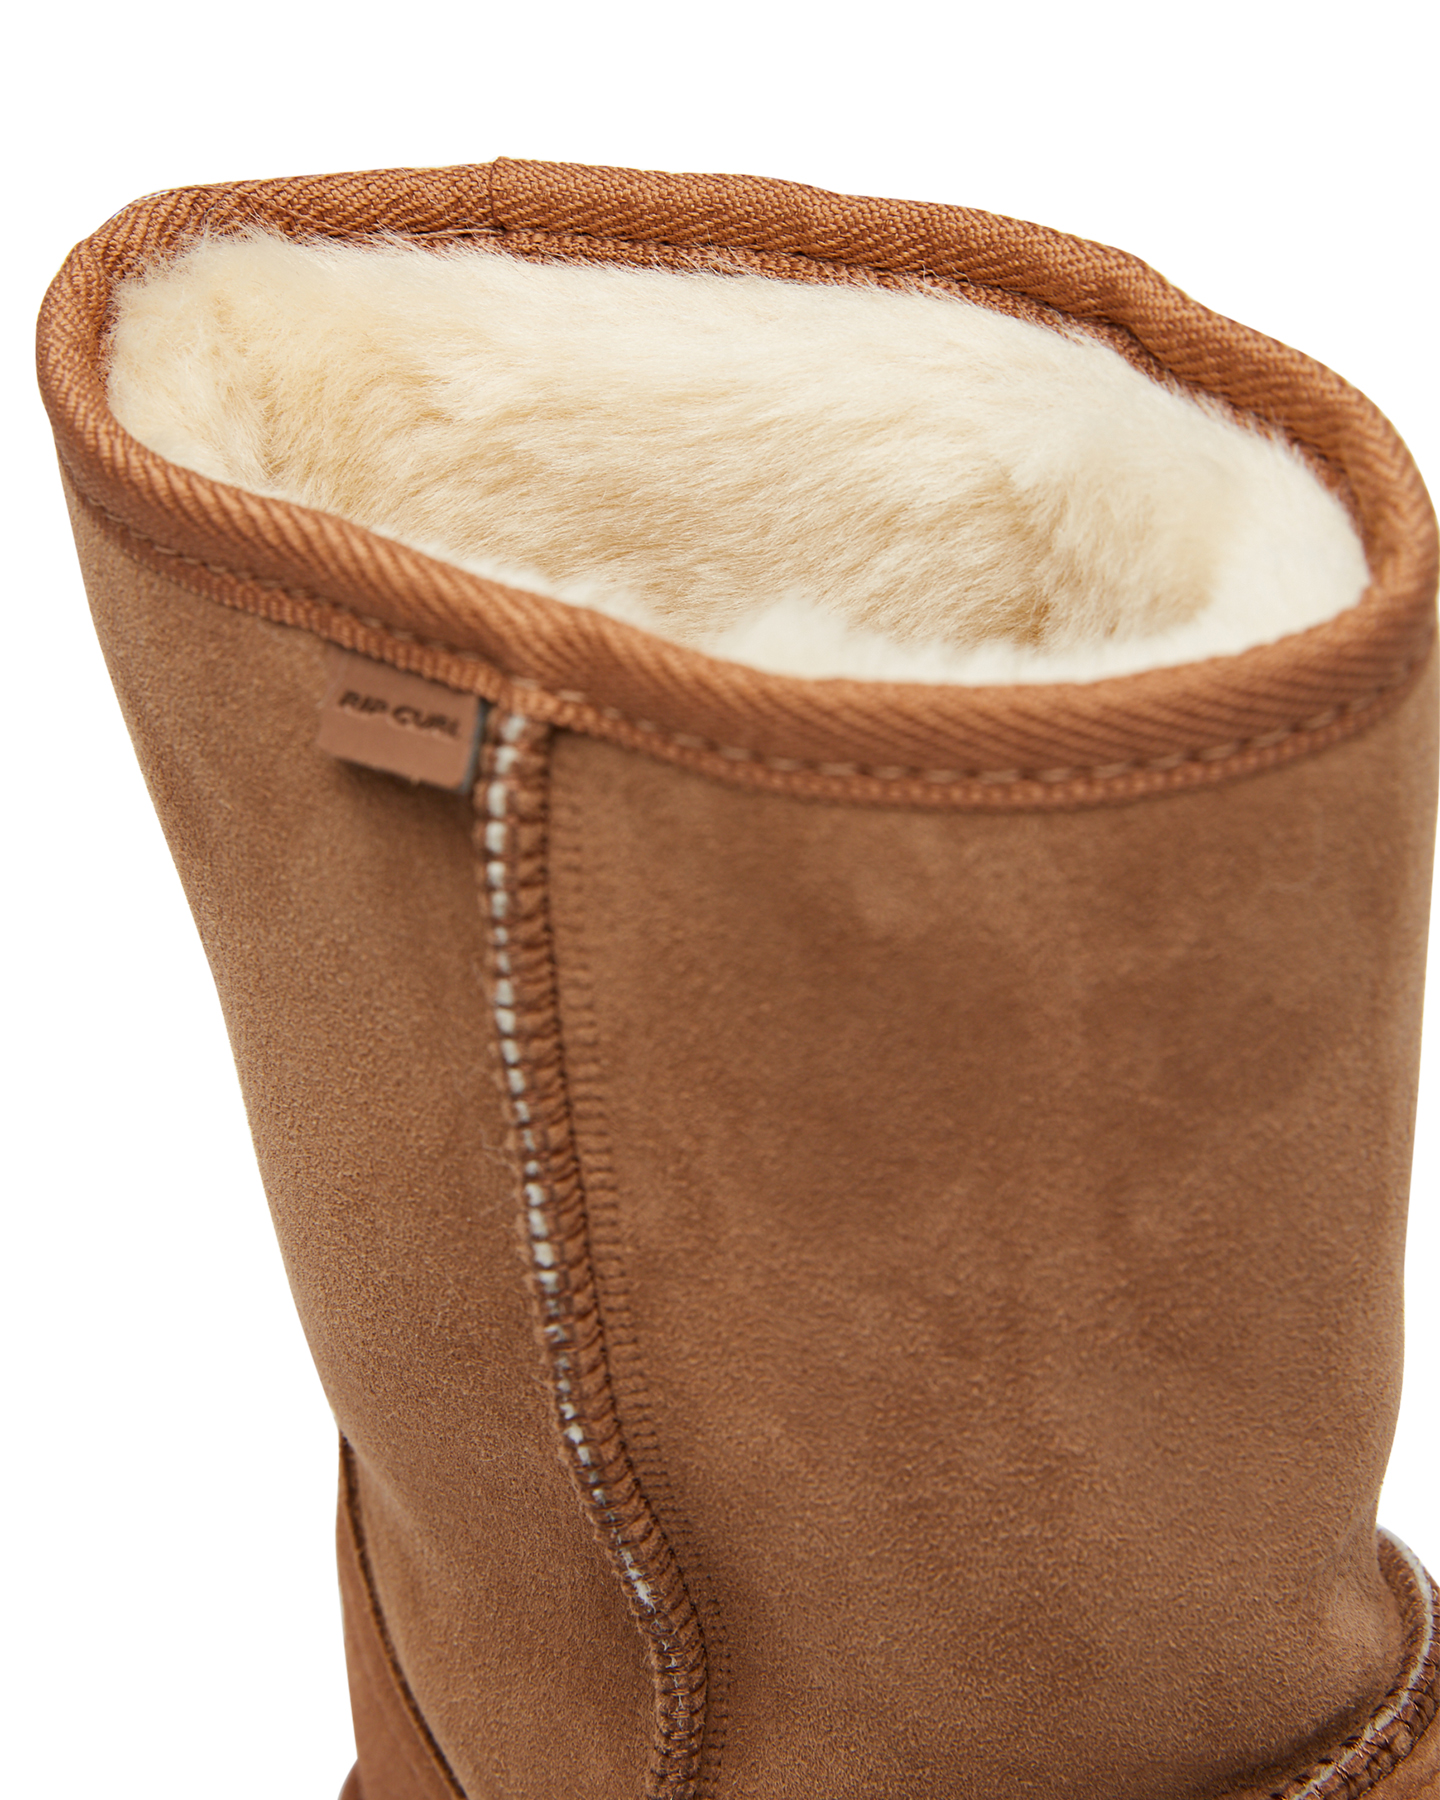 rip curl ugg boots